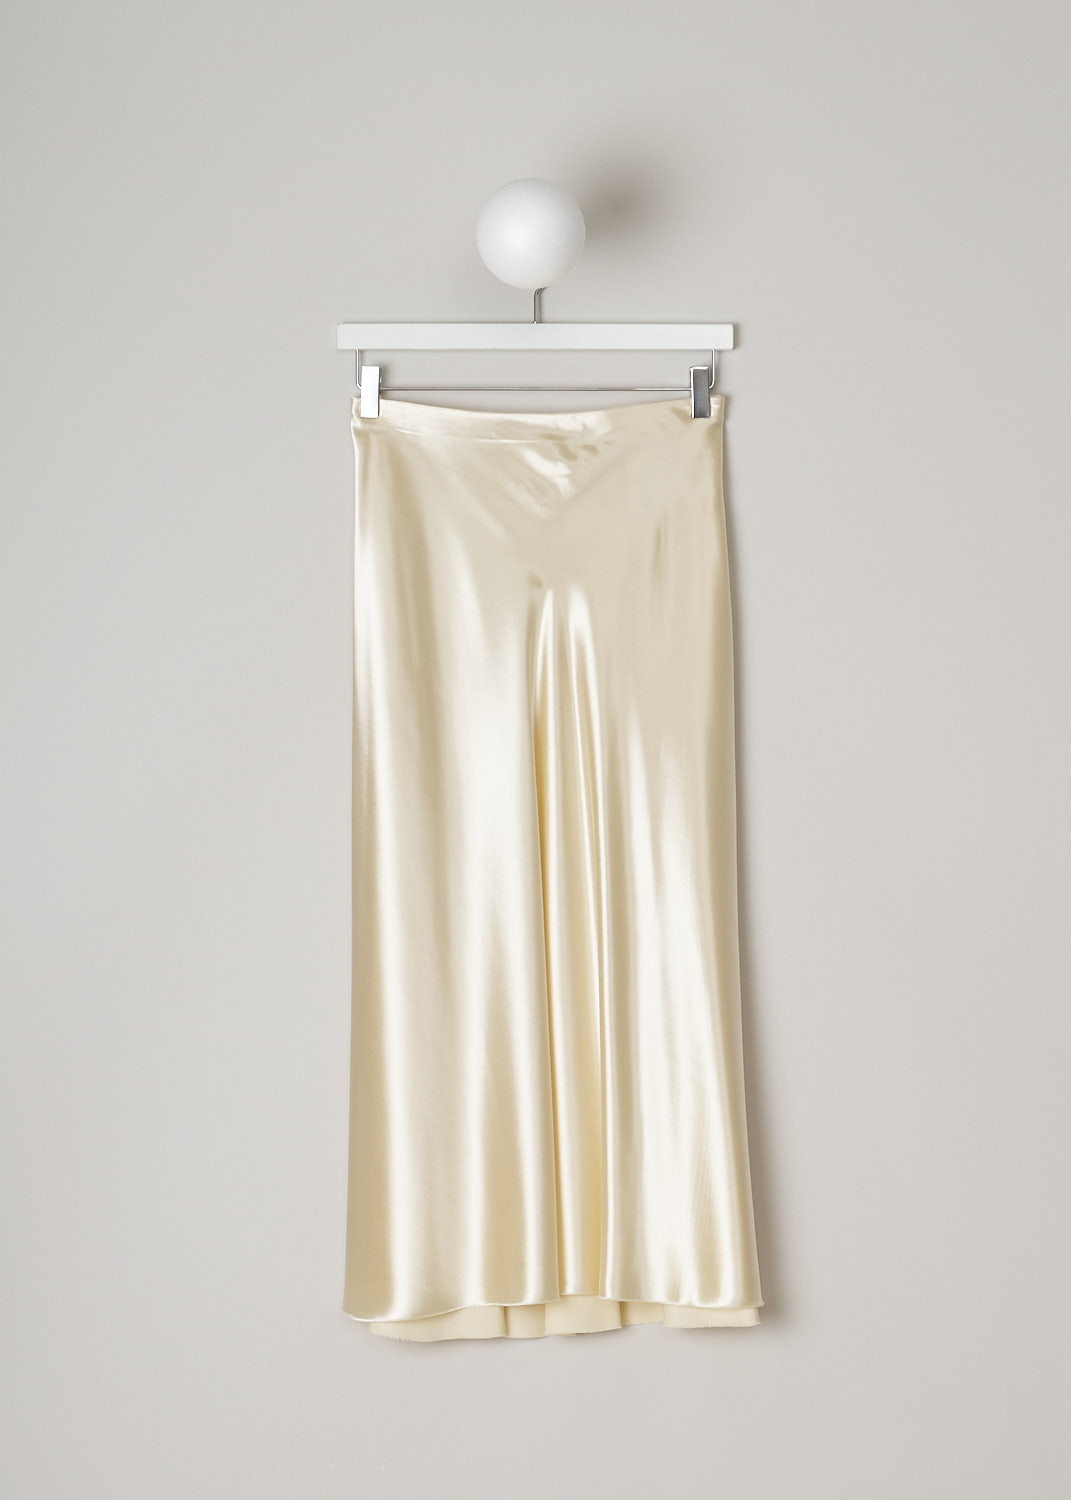 THE ROW, SATIN MEDELA SKIRT IN VANILLA, MEDELA_SKIRT_I068WI_723_VANILLA, Beige, White, Front, This flared vanilla yellow satin skirt has an elasticated waistband and a concealed side zip that functions as the closure option. The skirt has an asymmetrical hemline with a raw finish. 

